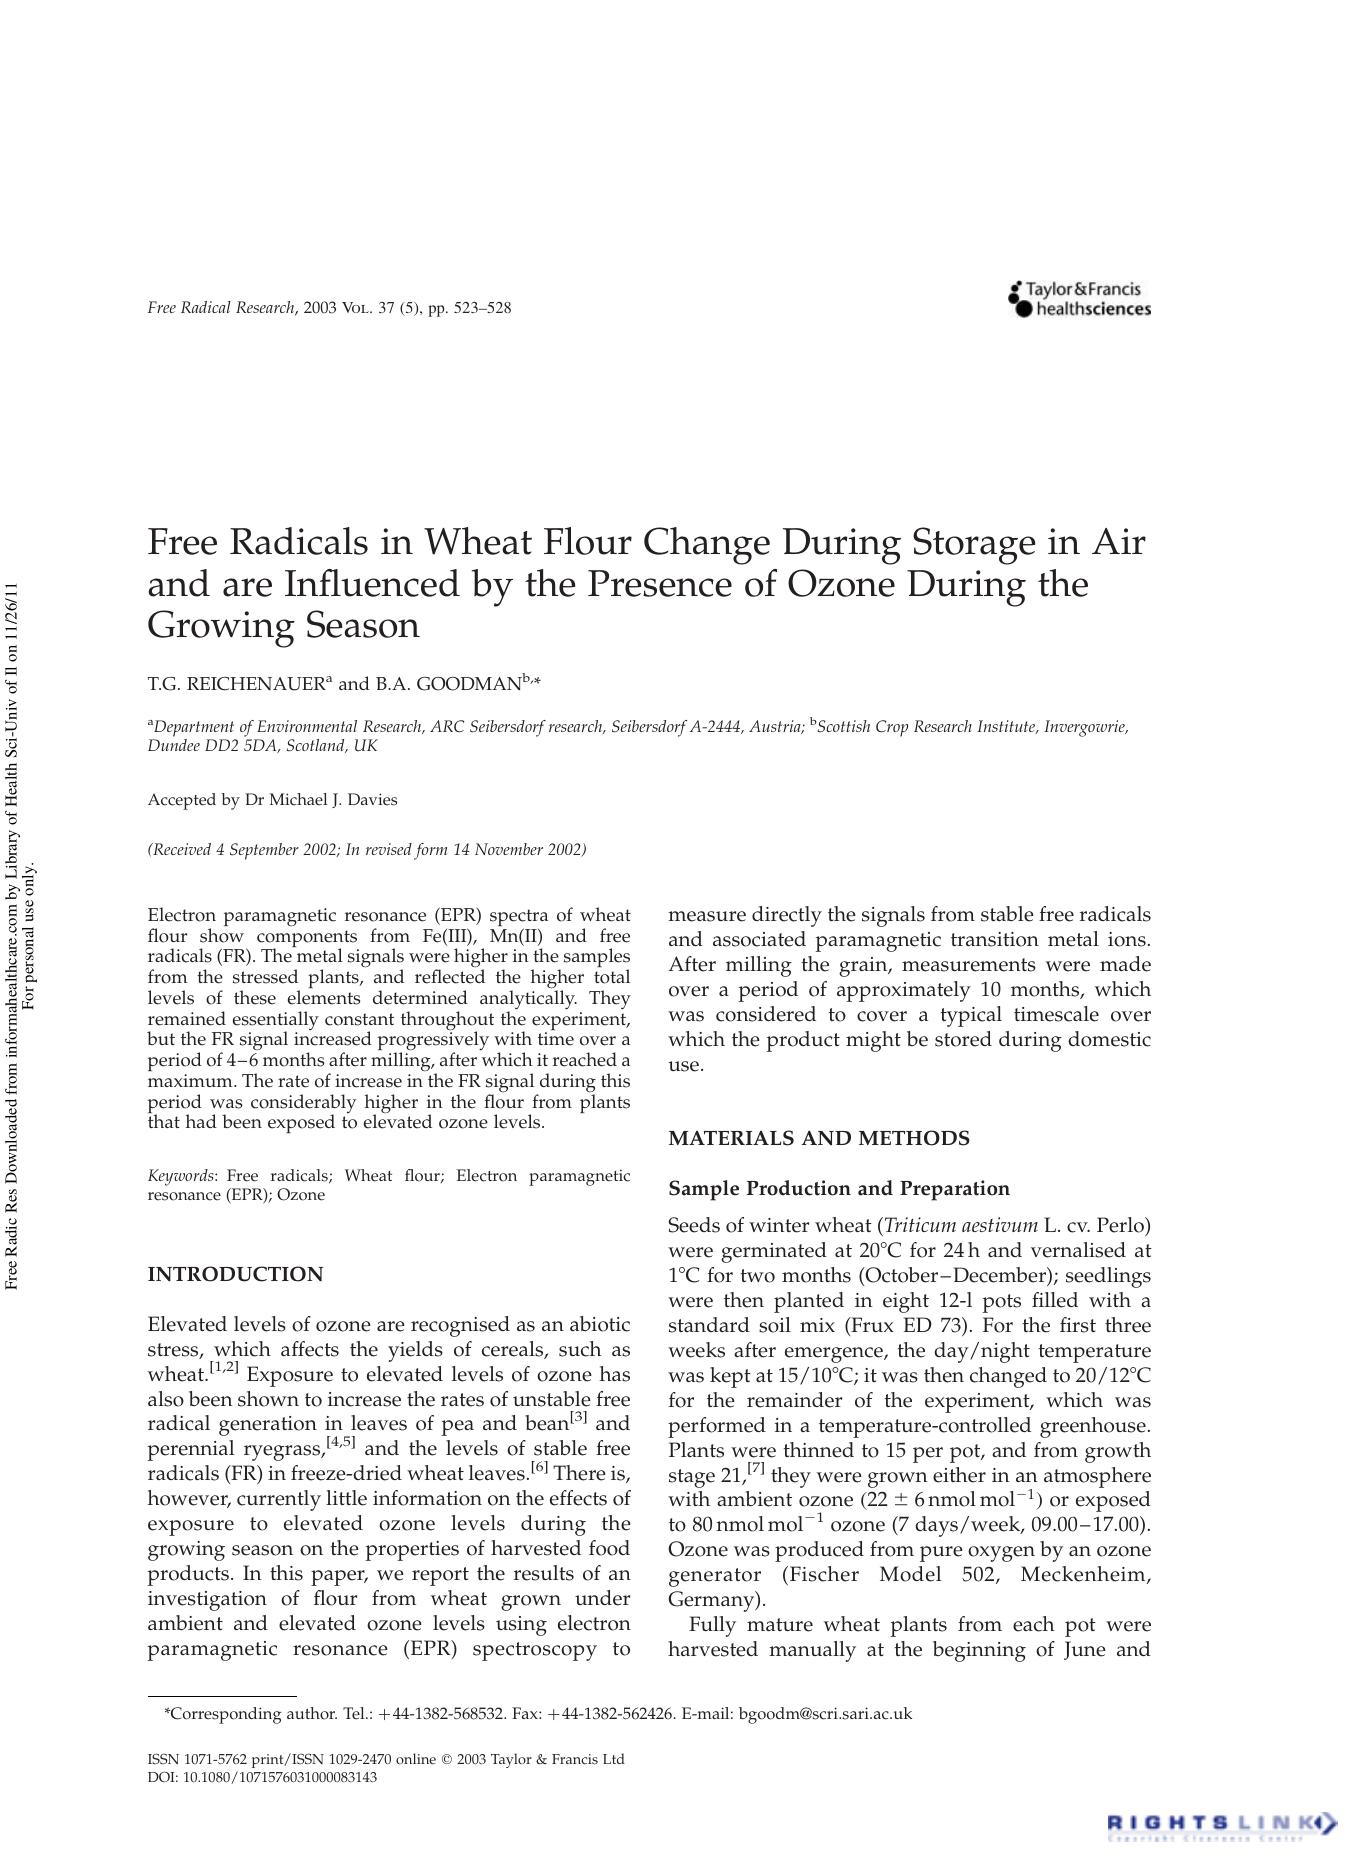 Free Radicals in Wheat Flour Change During Storage in Air and are Influenced by the Presence of Ozone During the Growing Season by T.G. Reichenauer1 & B.A. Goodman2